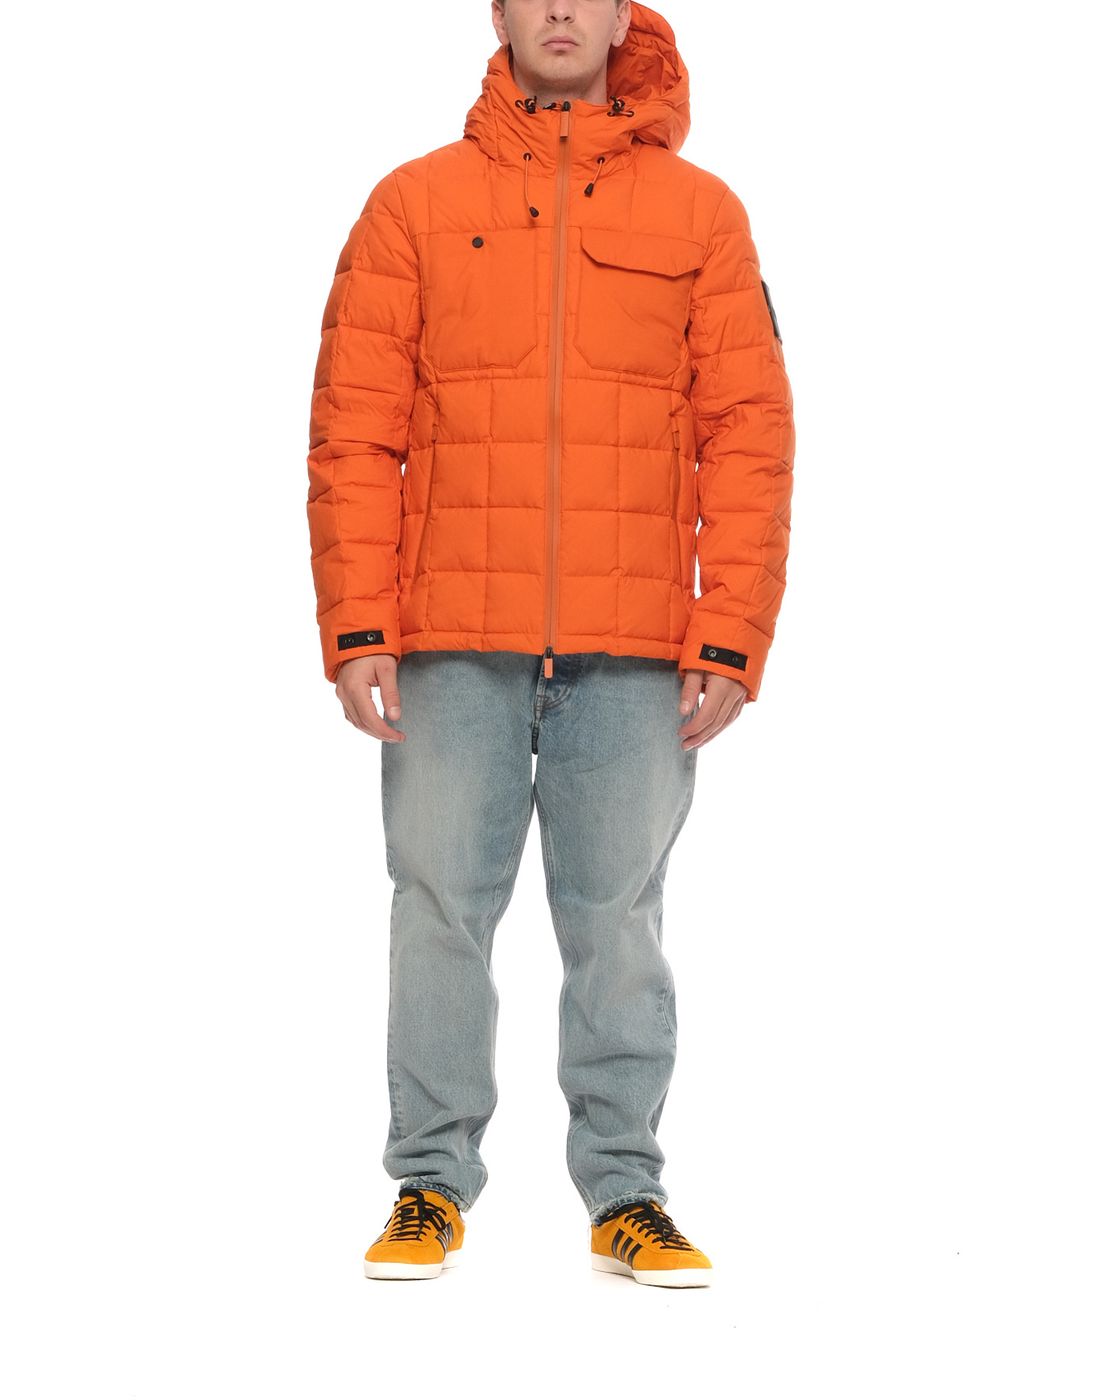 Jacket for man IOTM590AD34-RD 382 ORANGE OUTHERE